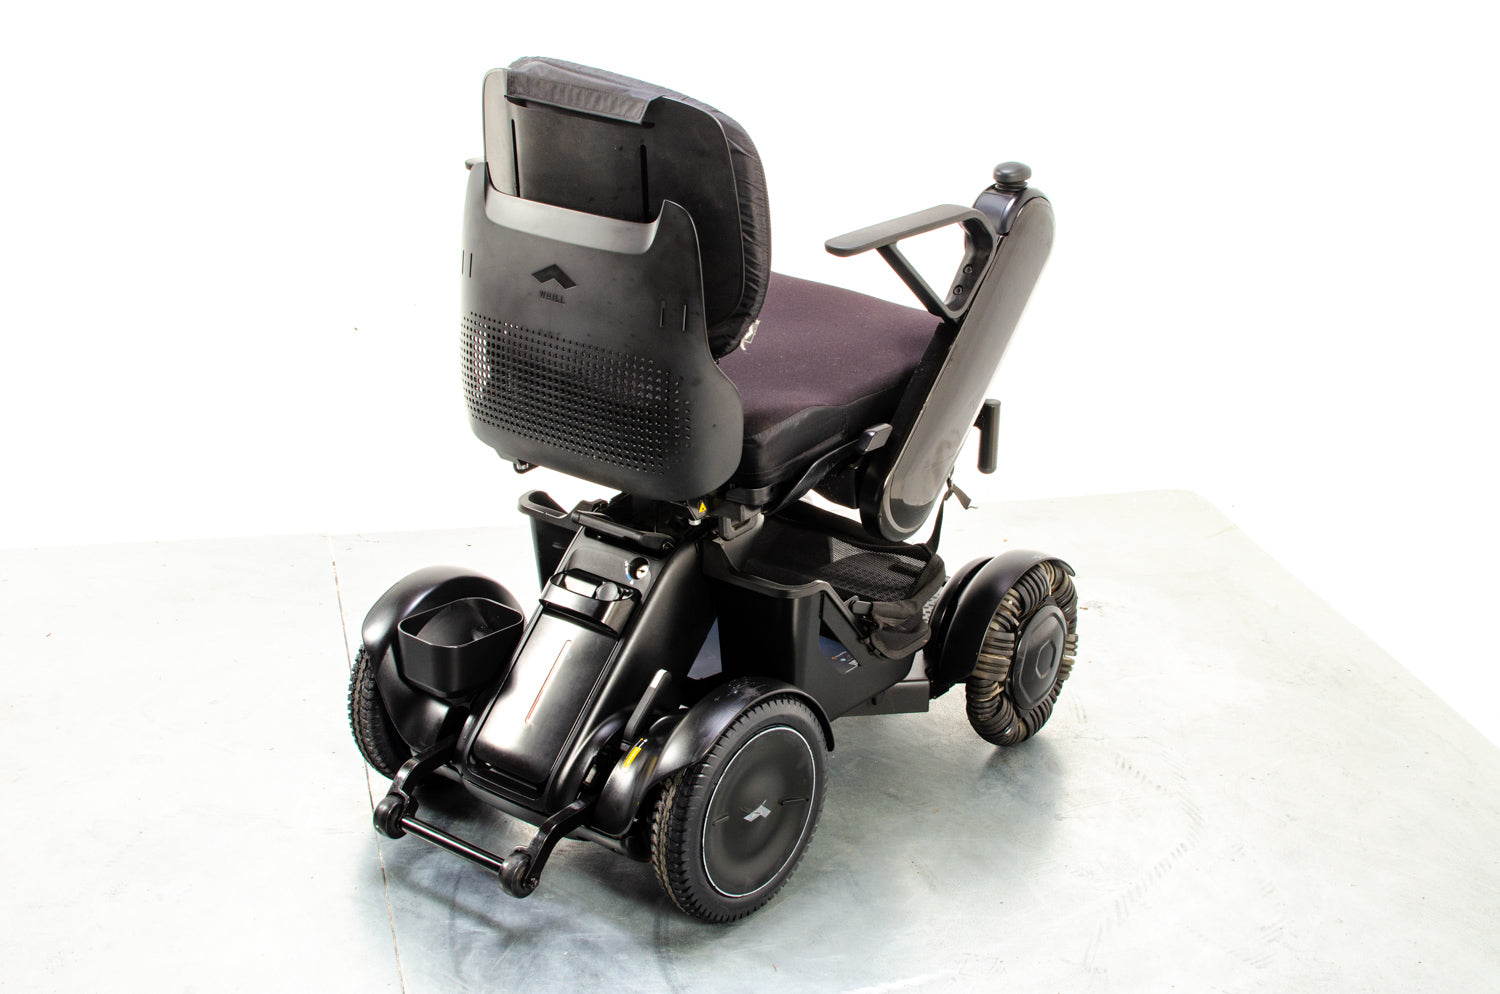 TGA Whill Model C Used Electric Wheelchair Powerchair Transportable Folding Portable